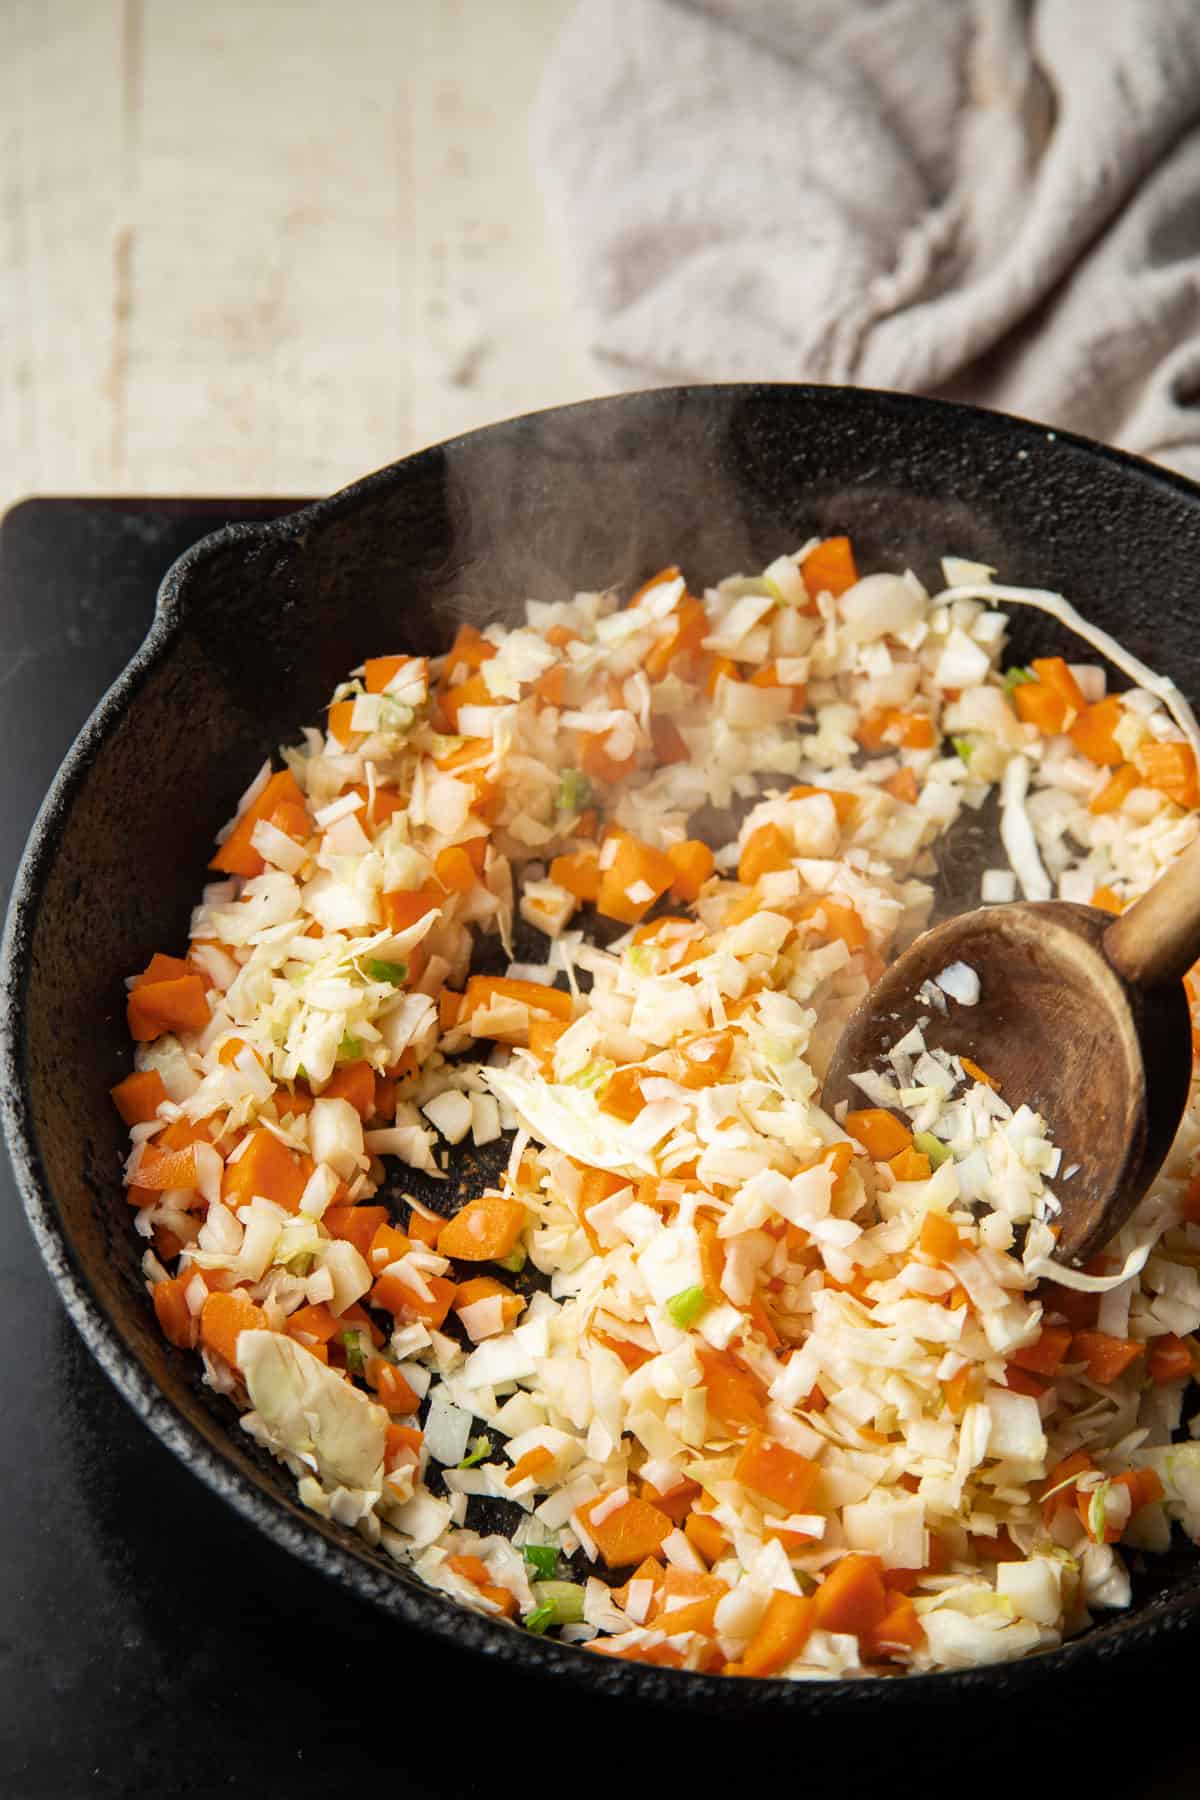 Cabbage, carrots and water chestnuts cooked in a pan.